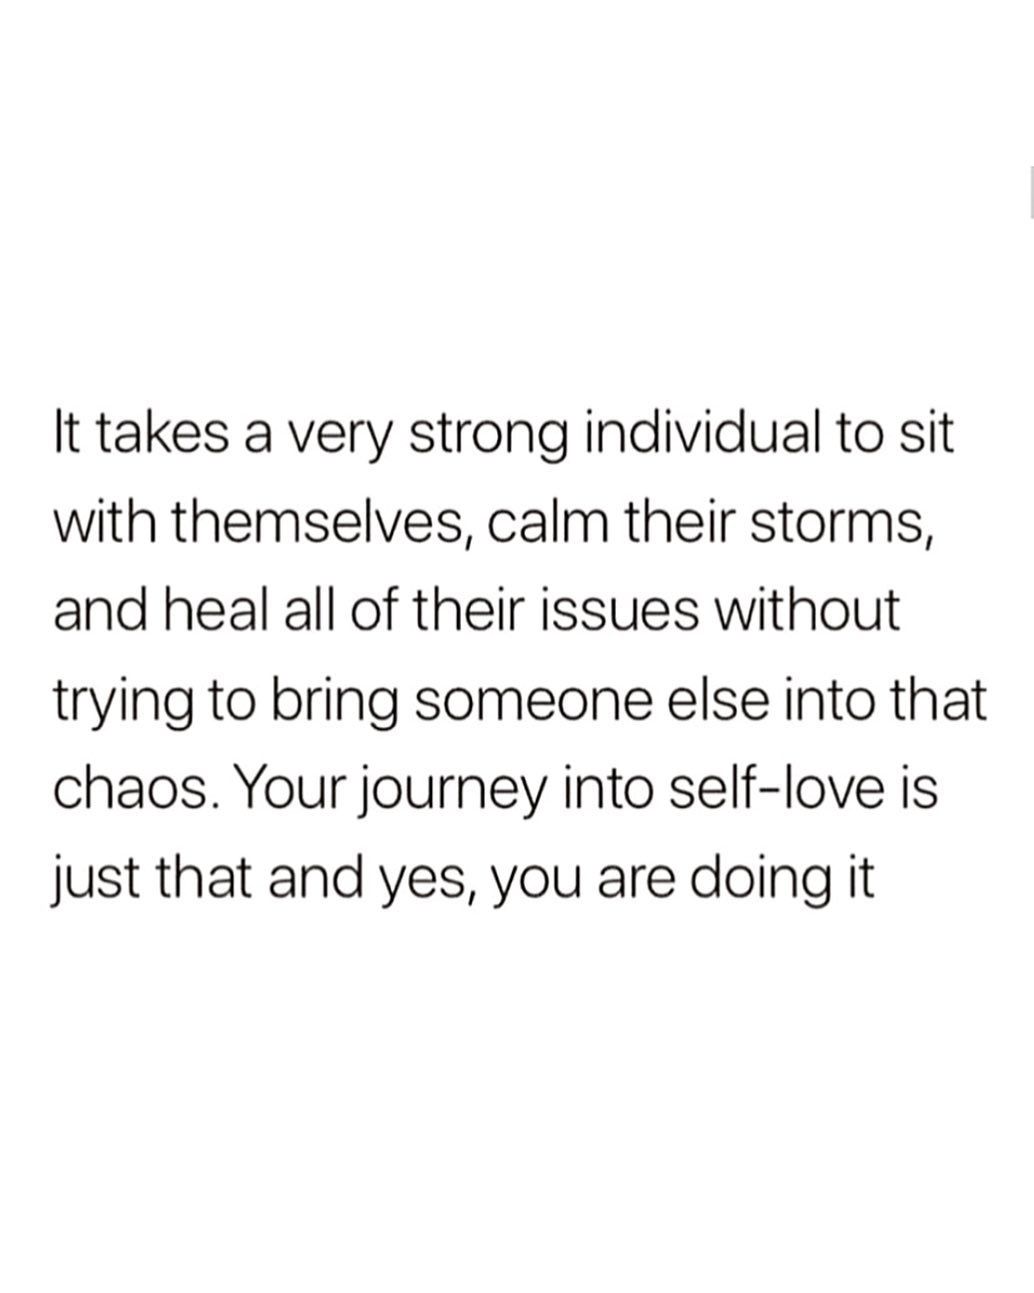 Your journey into self loves